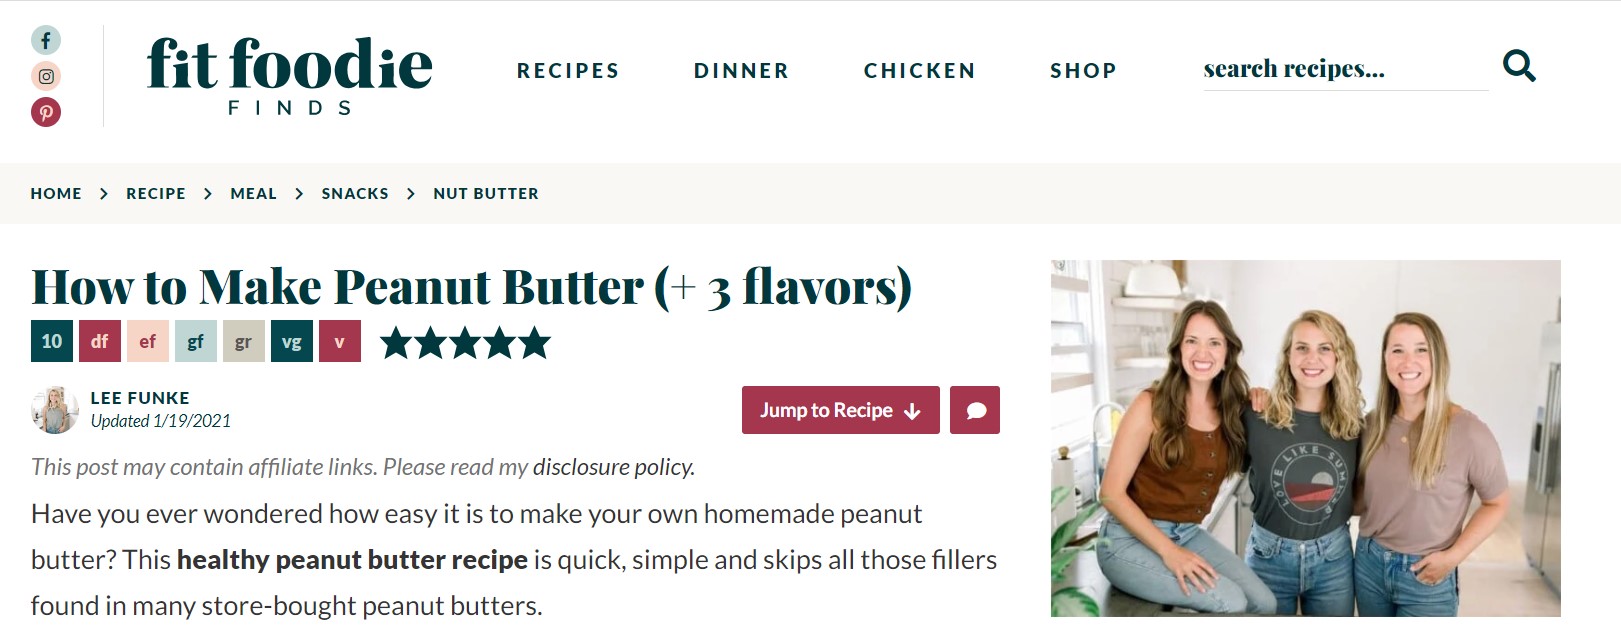 how to make peanut butter article